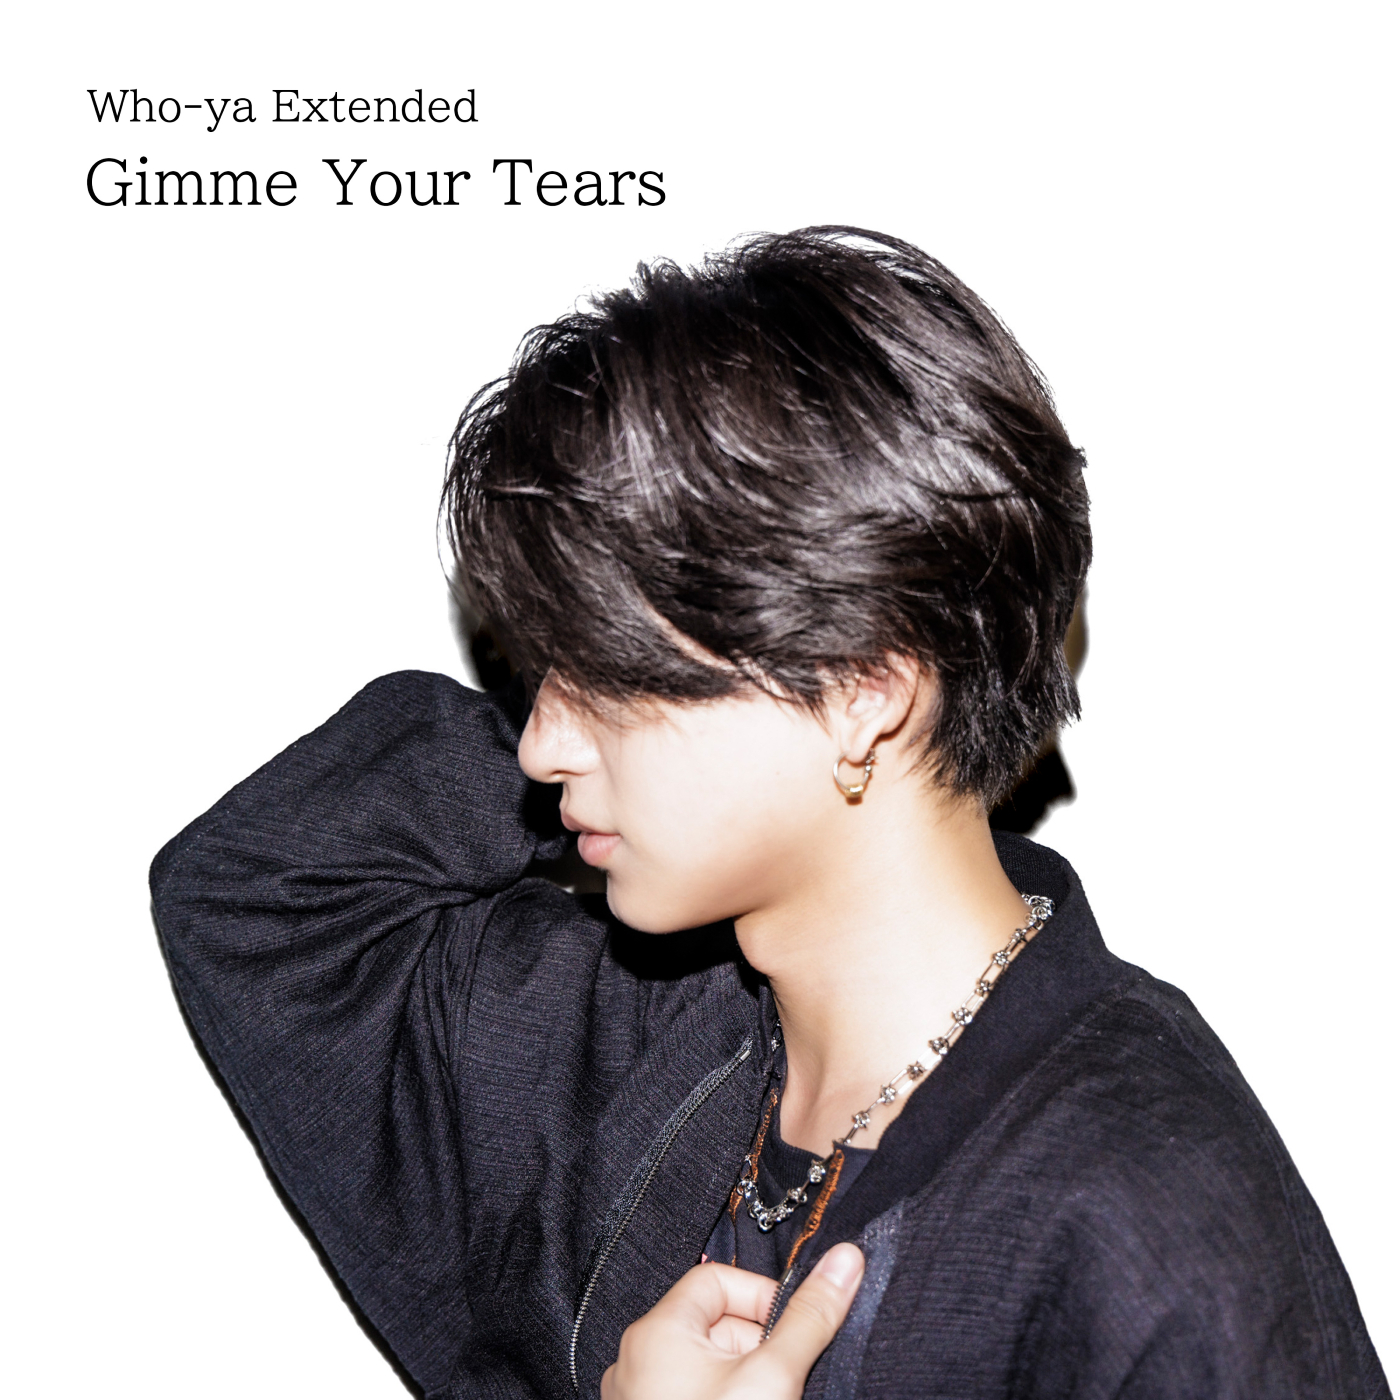 Who-ya Extended、 新曲「Gimme Your Tears」の配信日発表！ 4度目のワンマンライブの開催も決定 - 画像一覧（2/2）